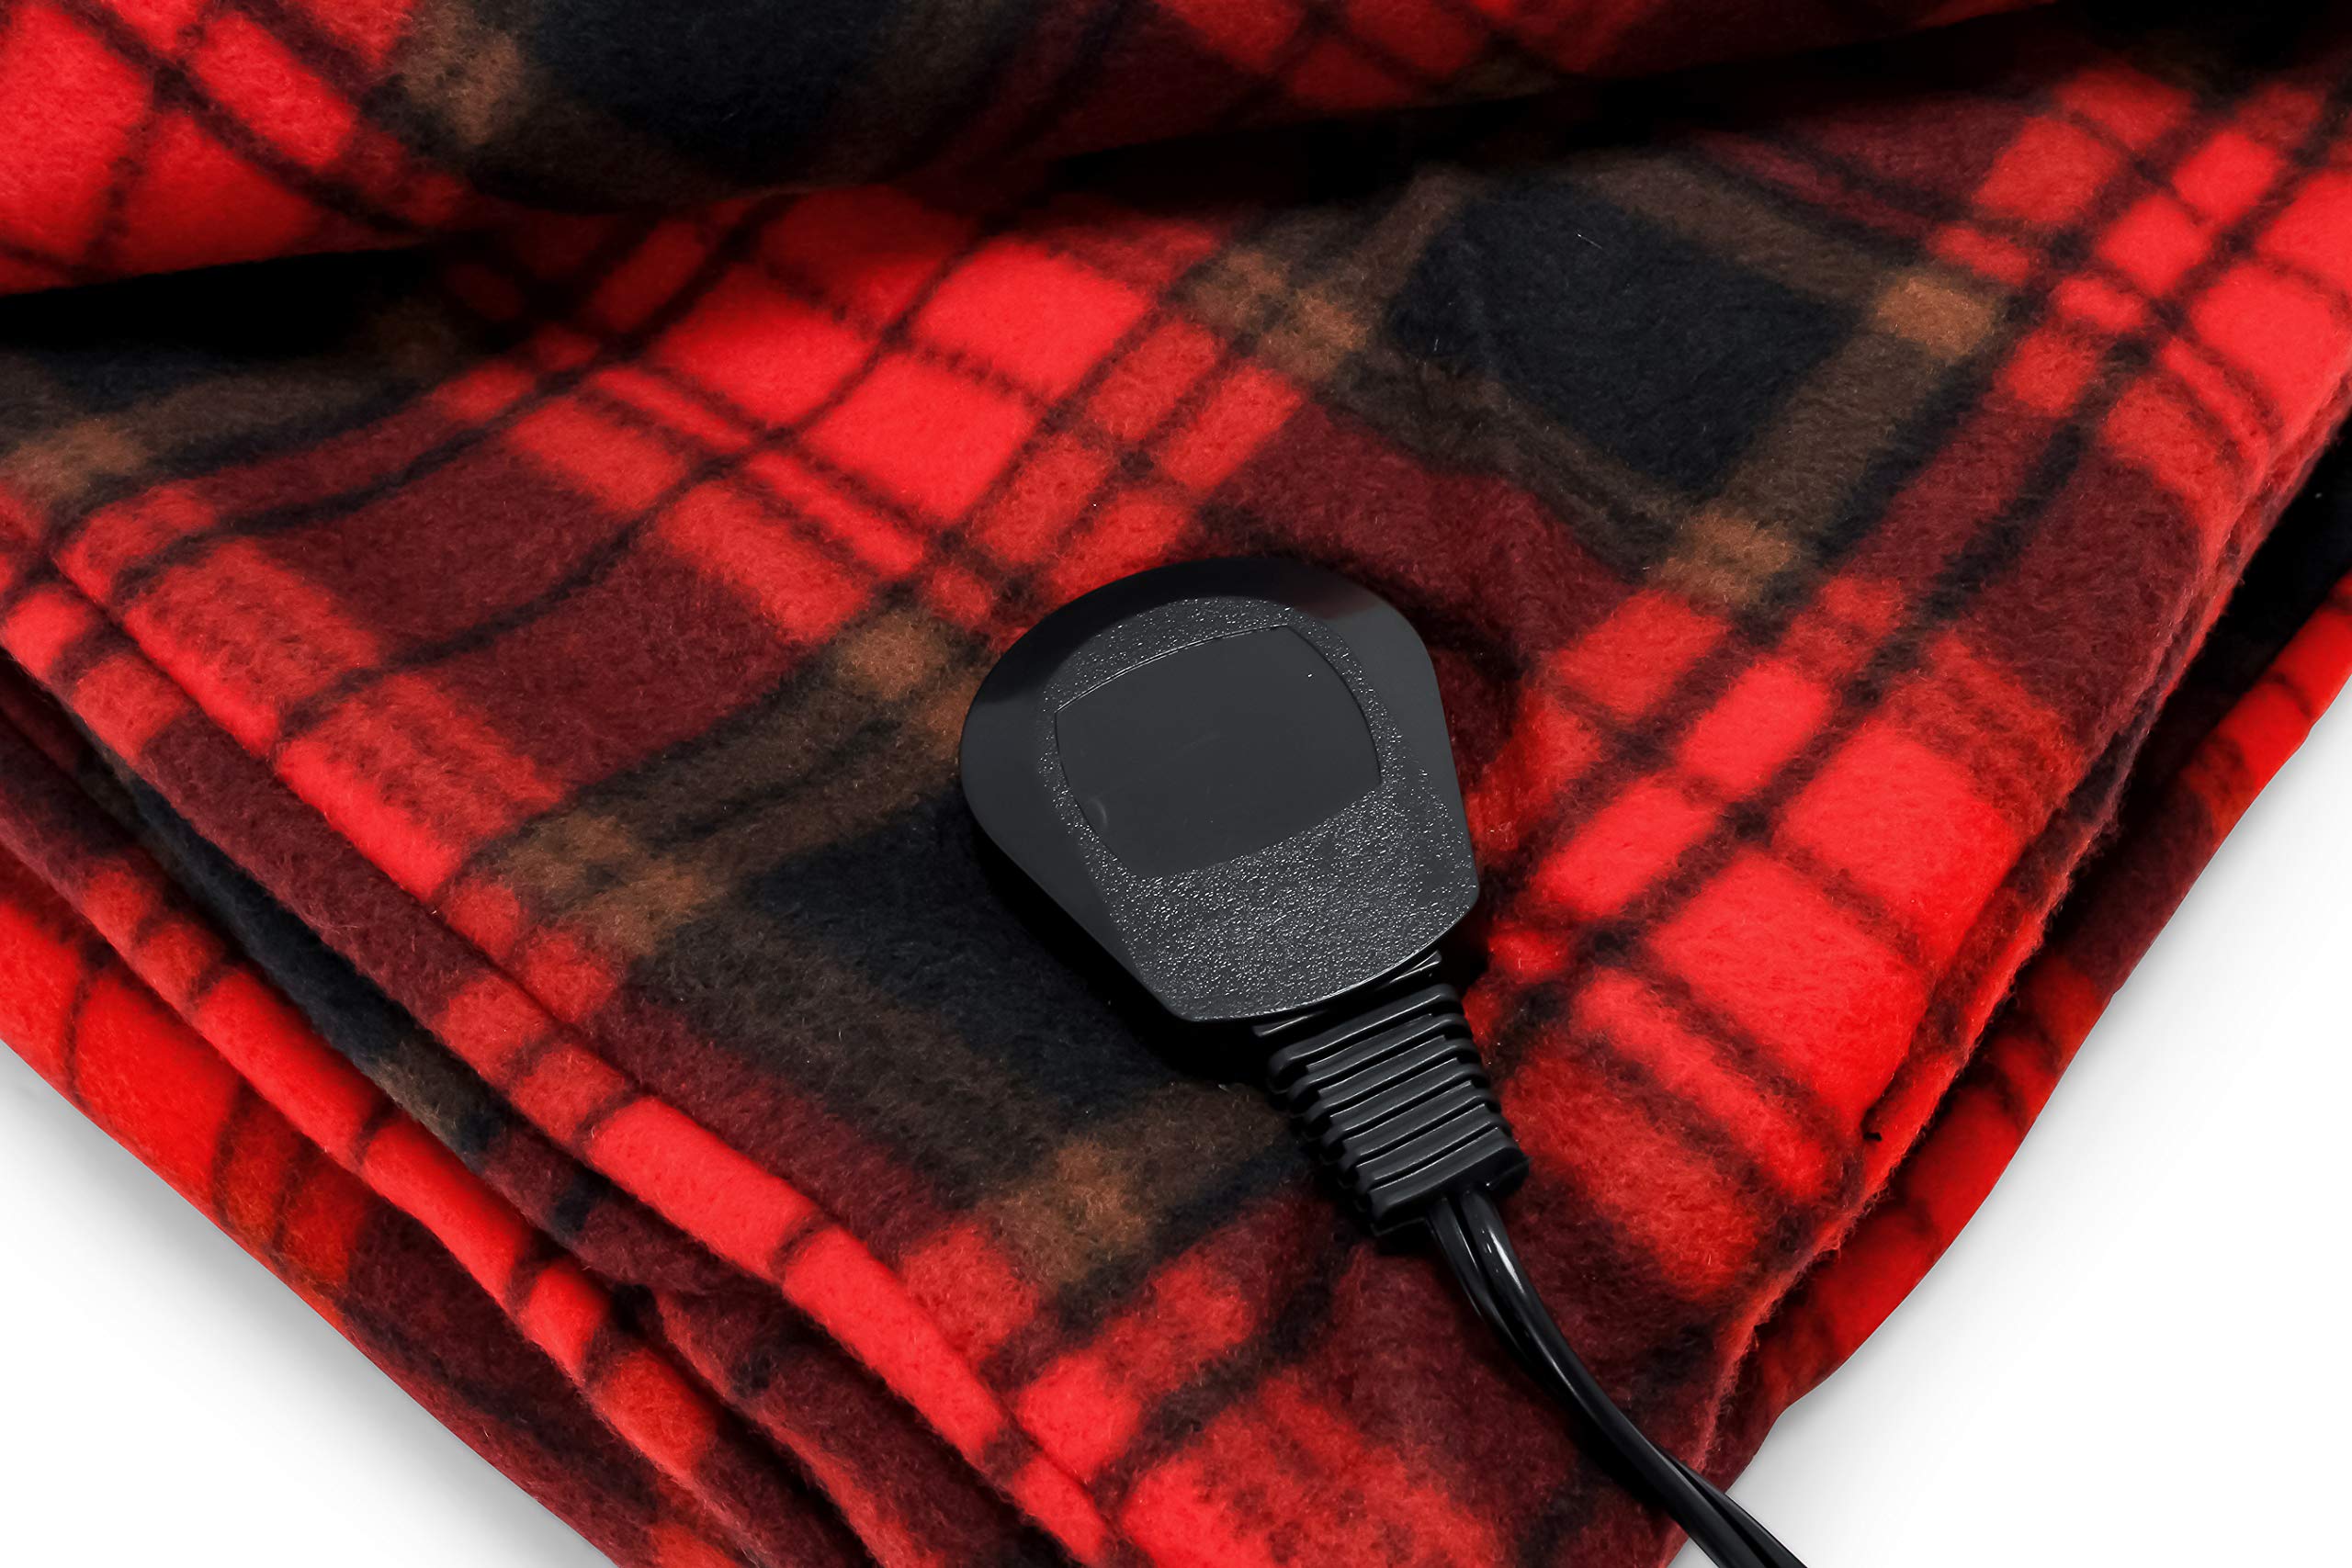 Camco Polar Fleece Heated Blanket - Power Cord Plugs into 12V Vehicle Power Outlet | Great for Cold Weather, Traveling, or Emergencies - Plaid Red (42897), 59